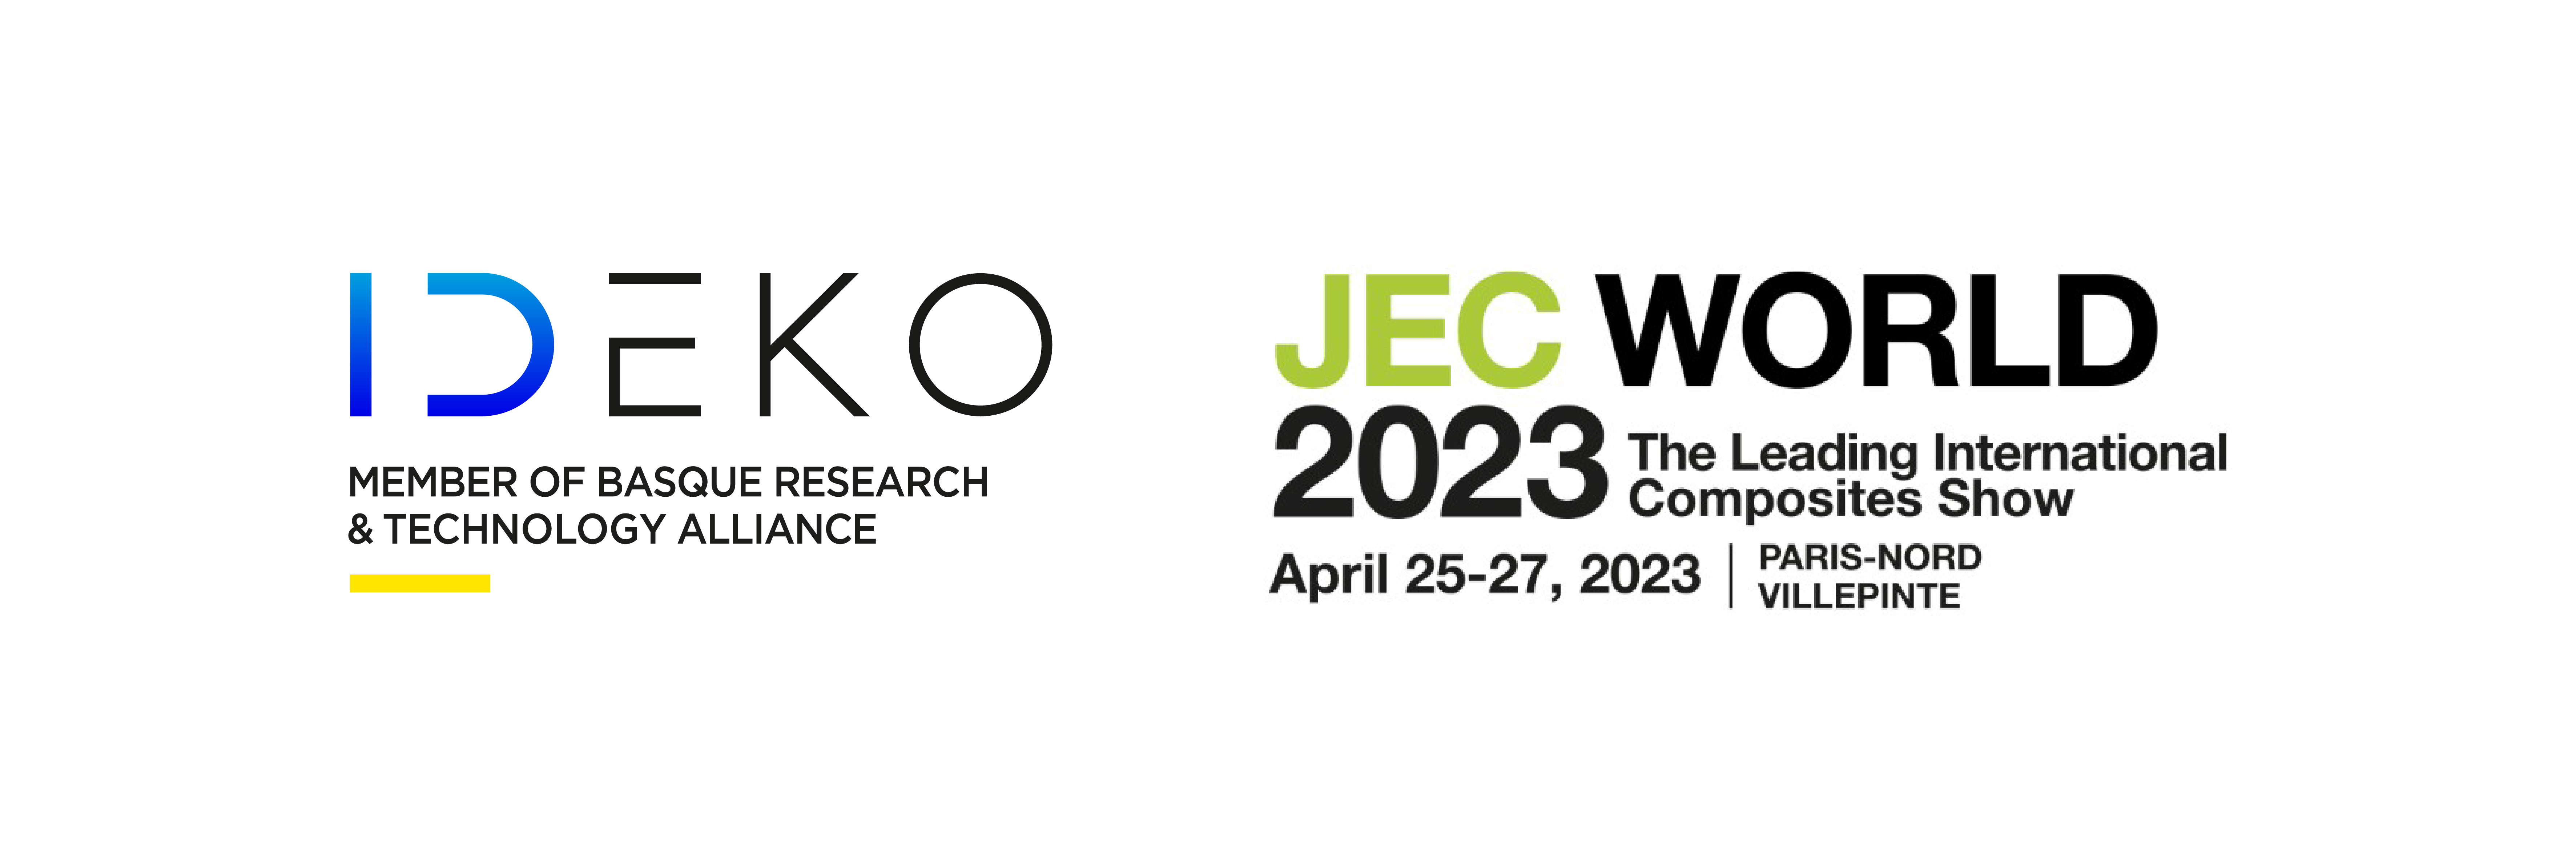 IDEKO will showcase at JEC World 2023 its latest advances for automated manufacture composites parts